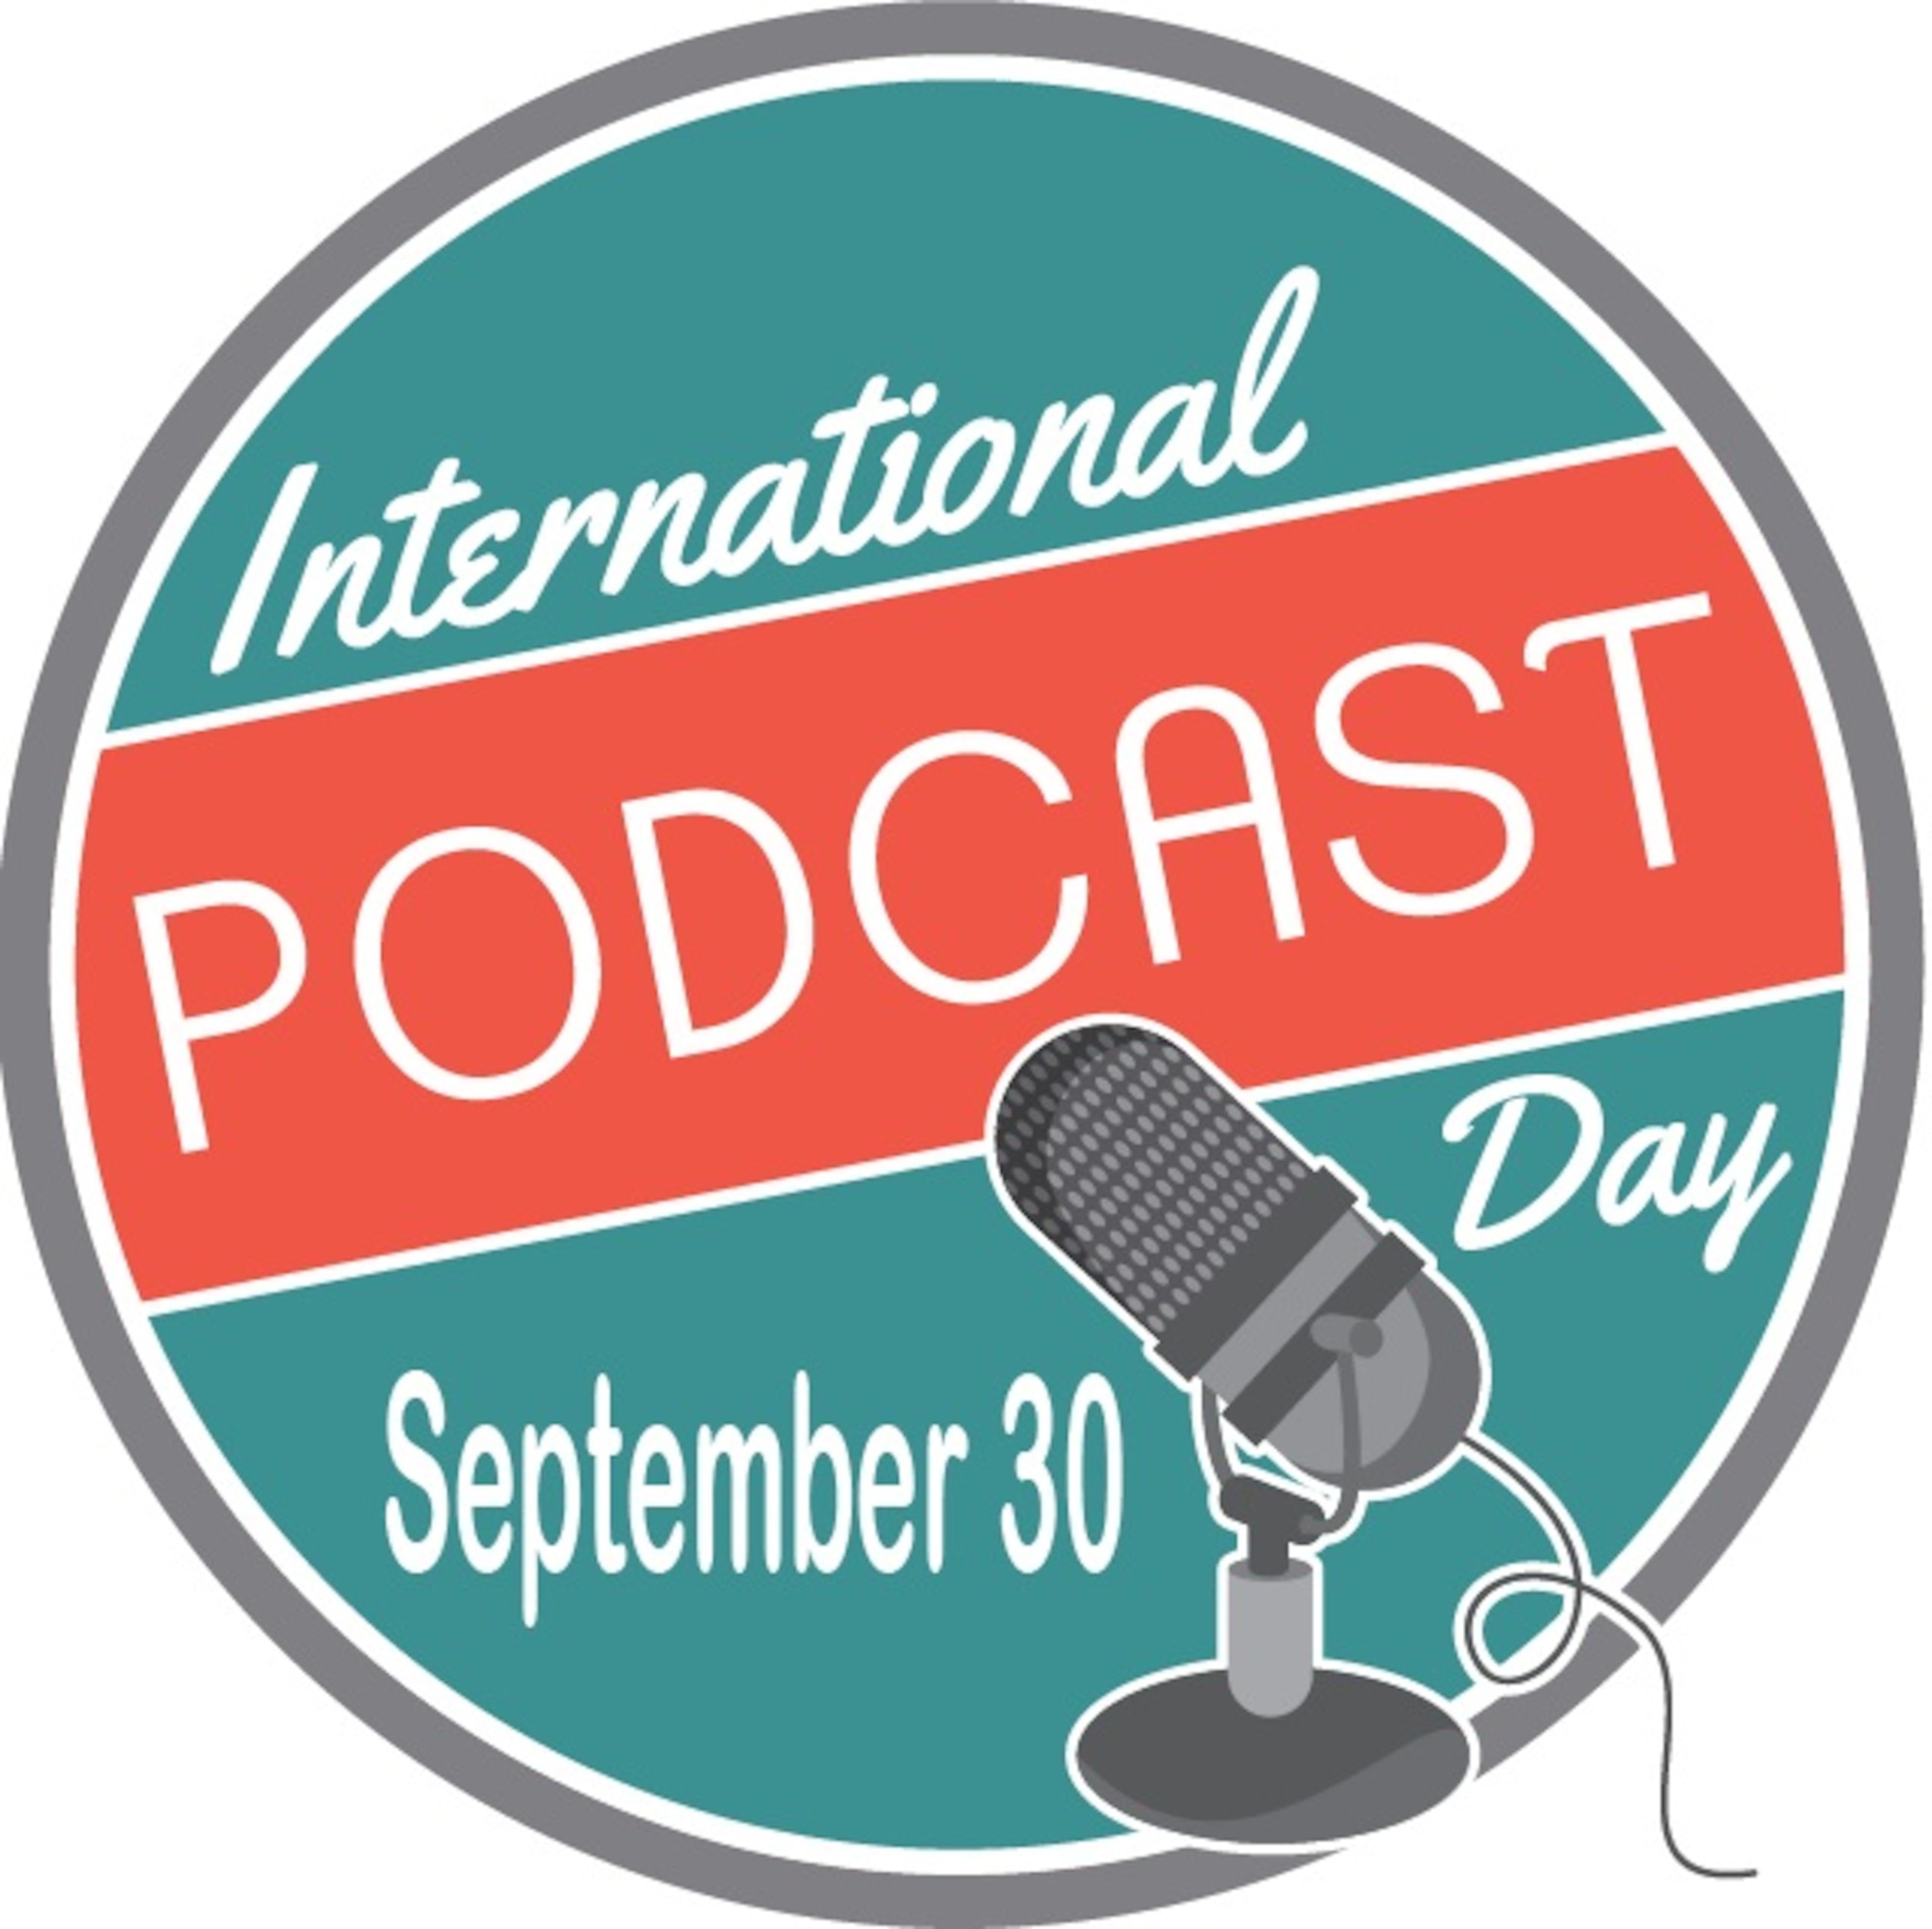 Since 2015, the power and popularity of podcasting has been observed on September 30, via International Podcast Day. The more than 1.5 million podcasts and more than 34 million currently available episodes includes the recently launched OSI Today, the podcast featuring news and views from around the Office of Special Investigations. (IPD graphic)